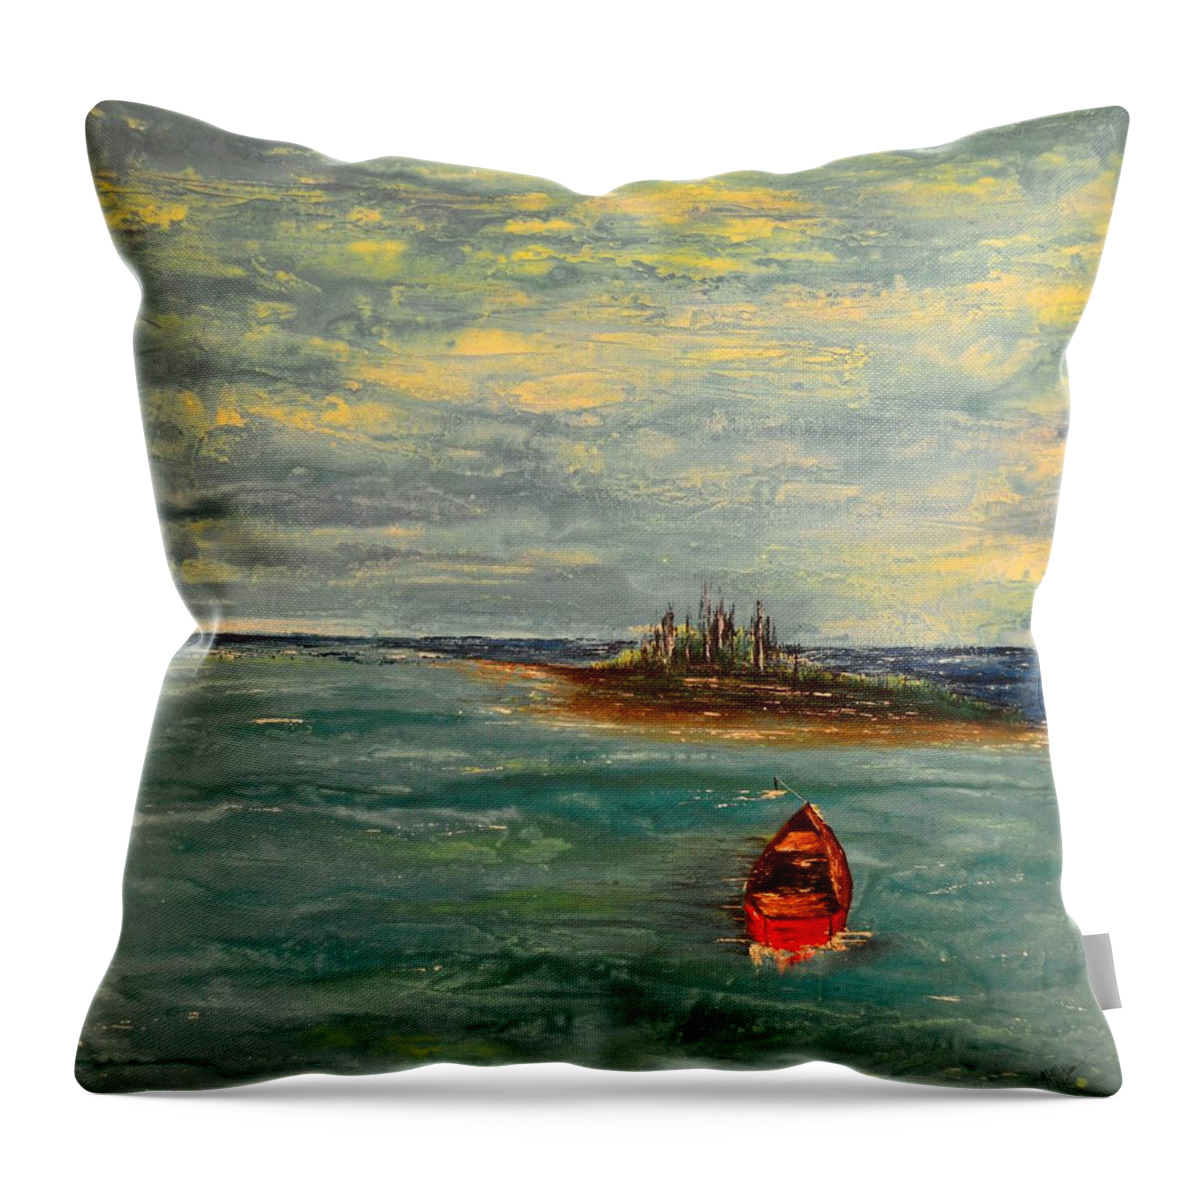 Ocean Tides Throw Pillow featuring the painting Turtle Bay by MiMi Stirn